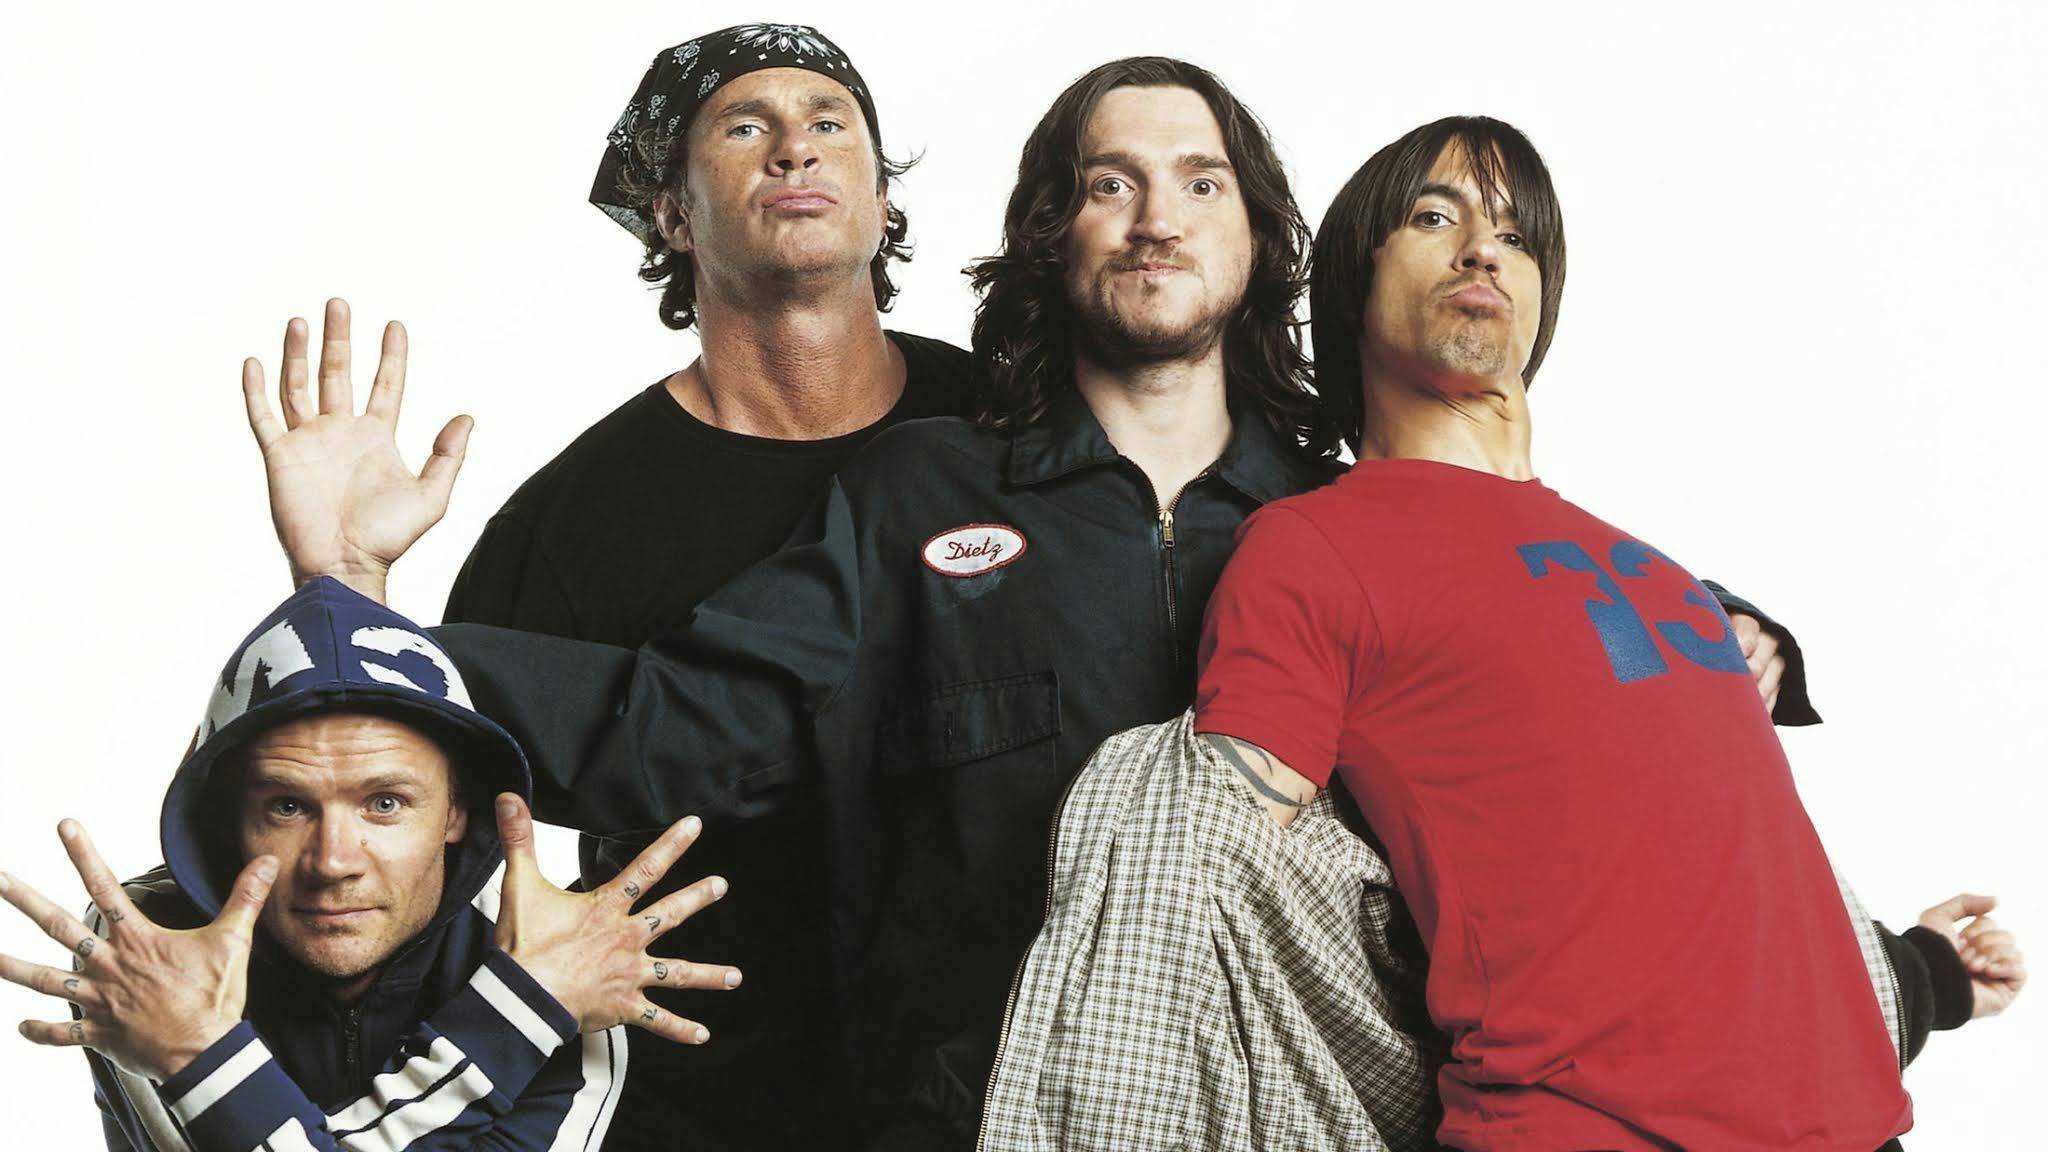 The 20 greatest Red Hot Chili Peppers songs – ranked